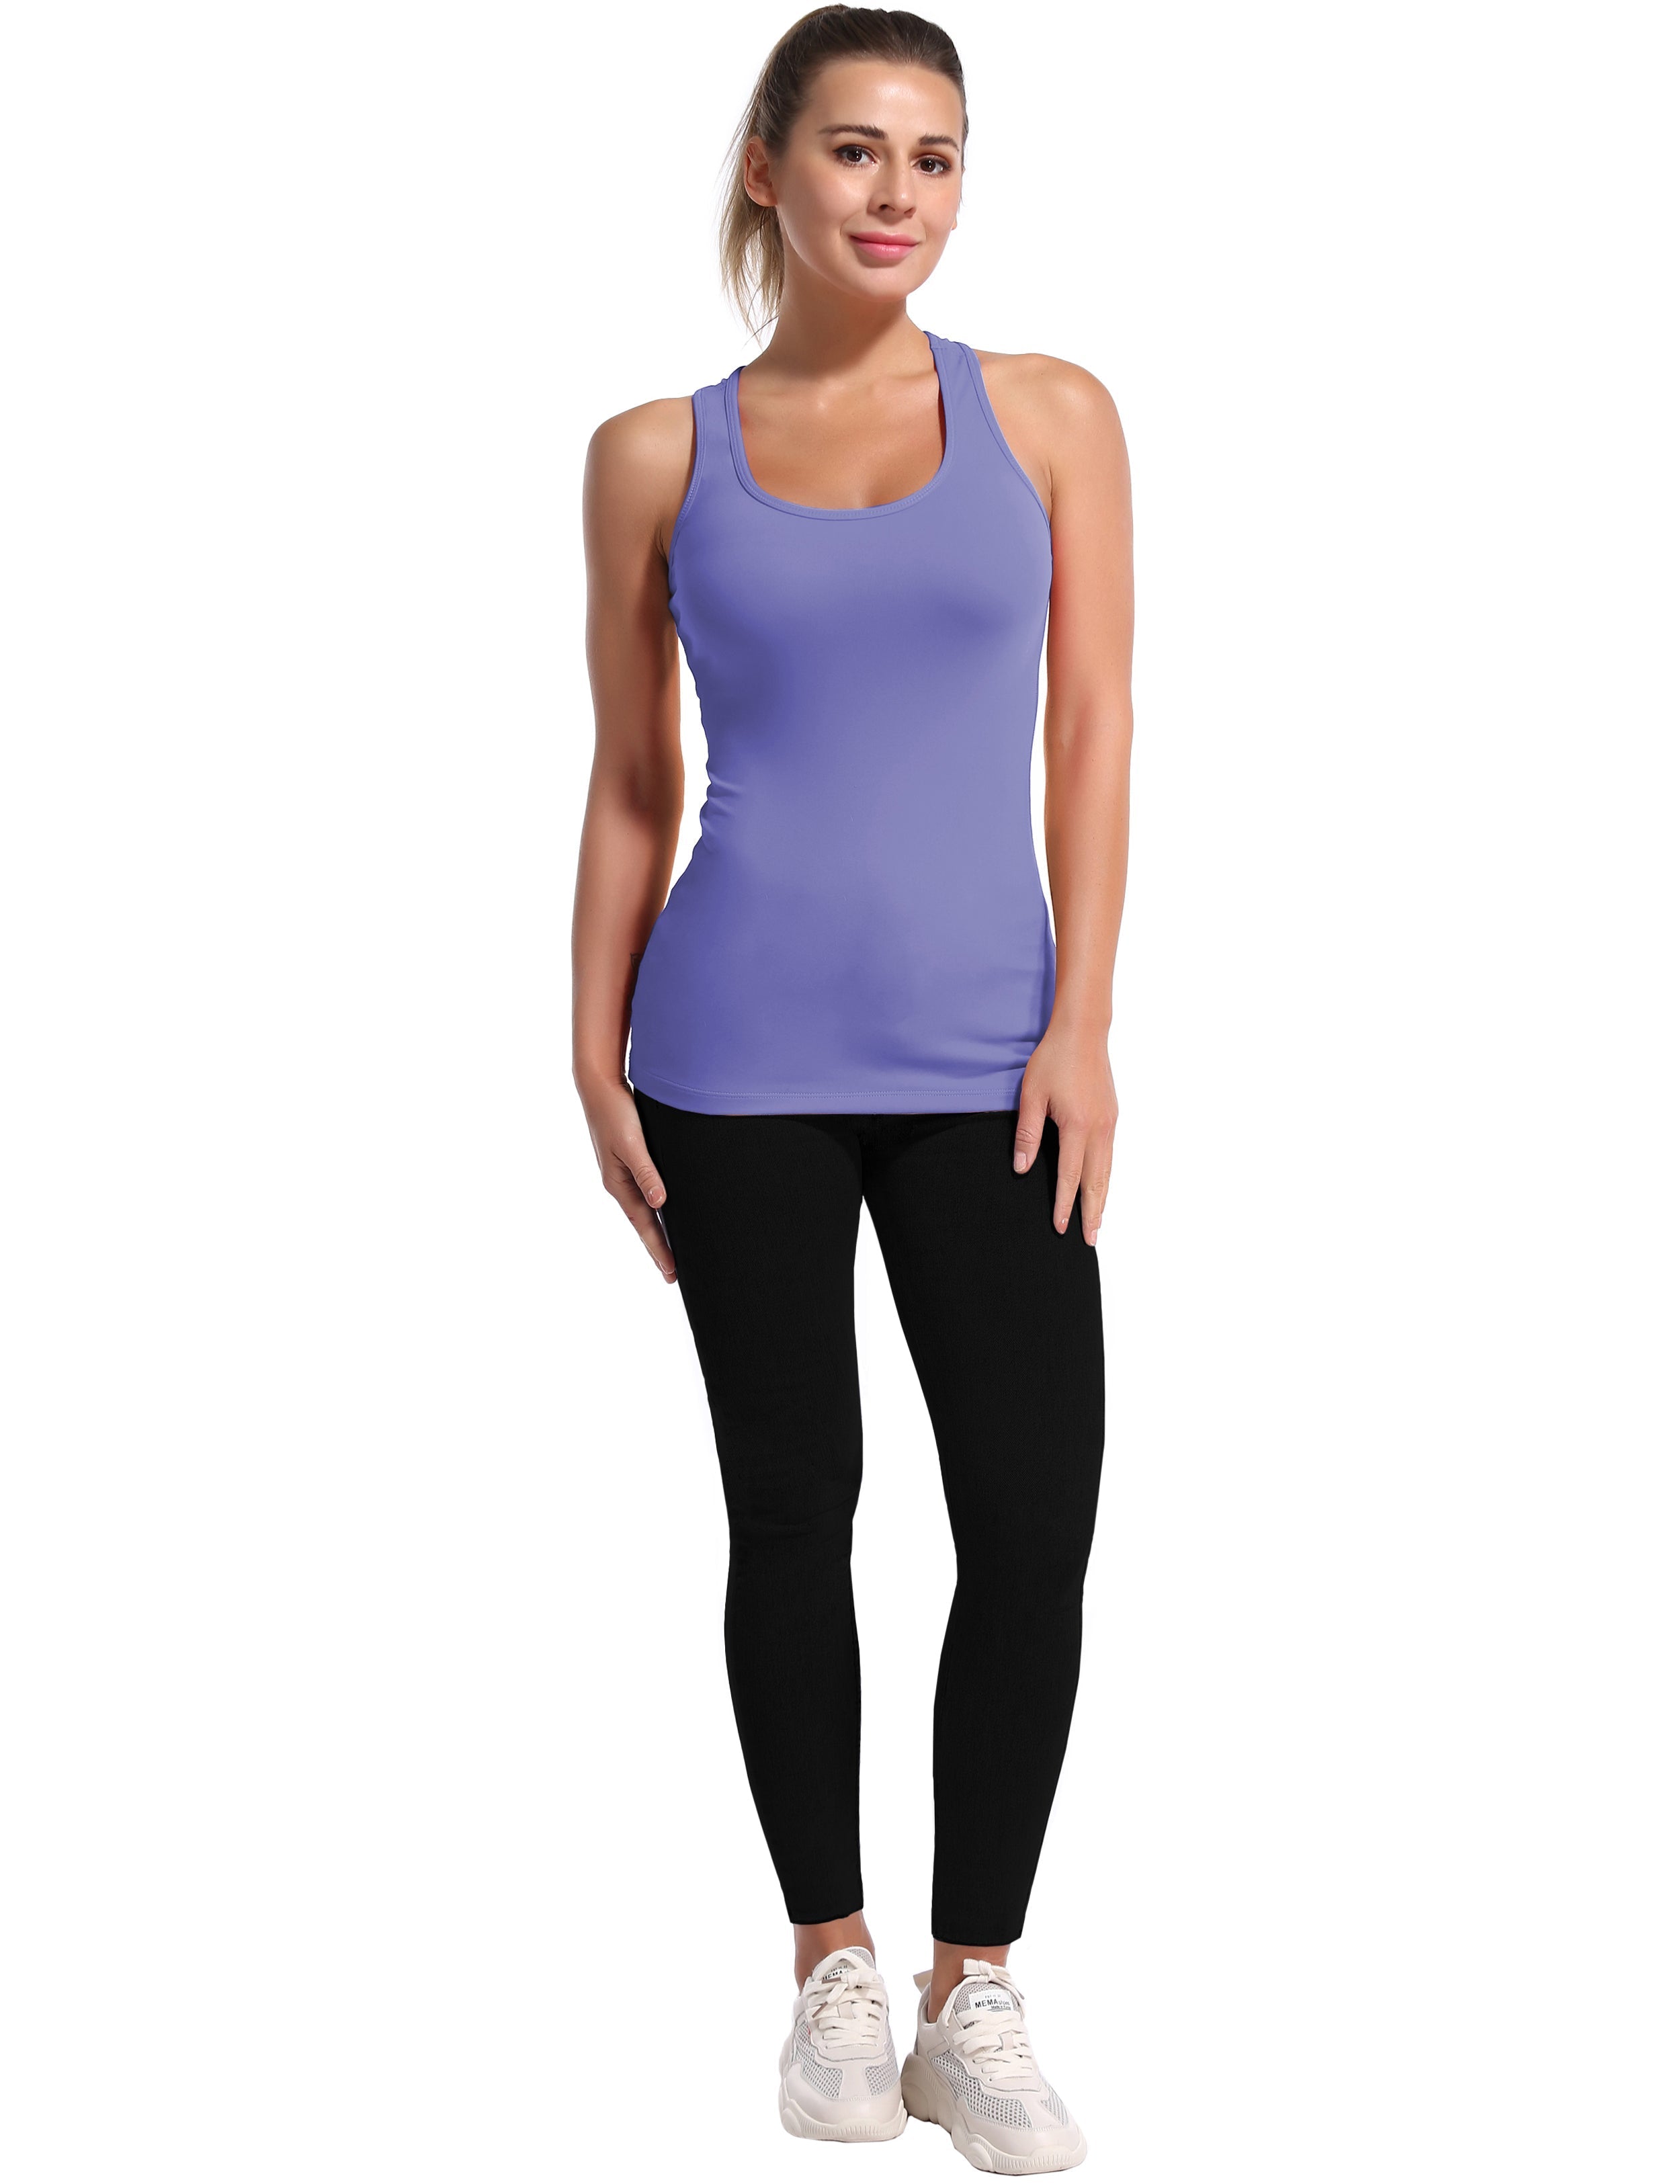 Racerback Athletic Tank Tops lavender 92%Nylon/8%Spandex(Cotton Soft) Designed for Tall Size Tight Fit So buttery soft, it feels weightless Sweat-wicking Four-way stretch Breathable Contours your body Sits below the waistband for moderate, everyday coverage